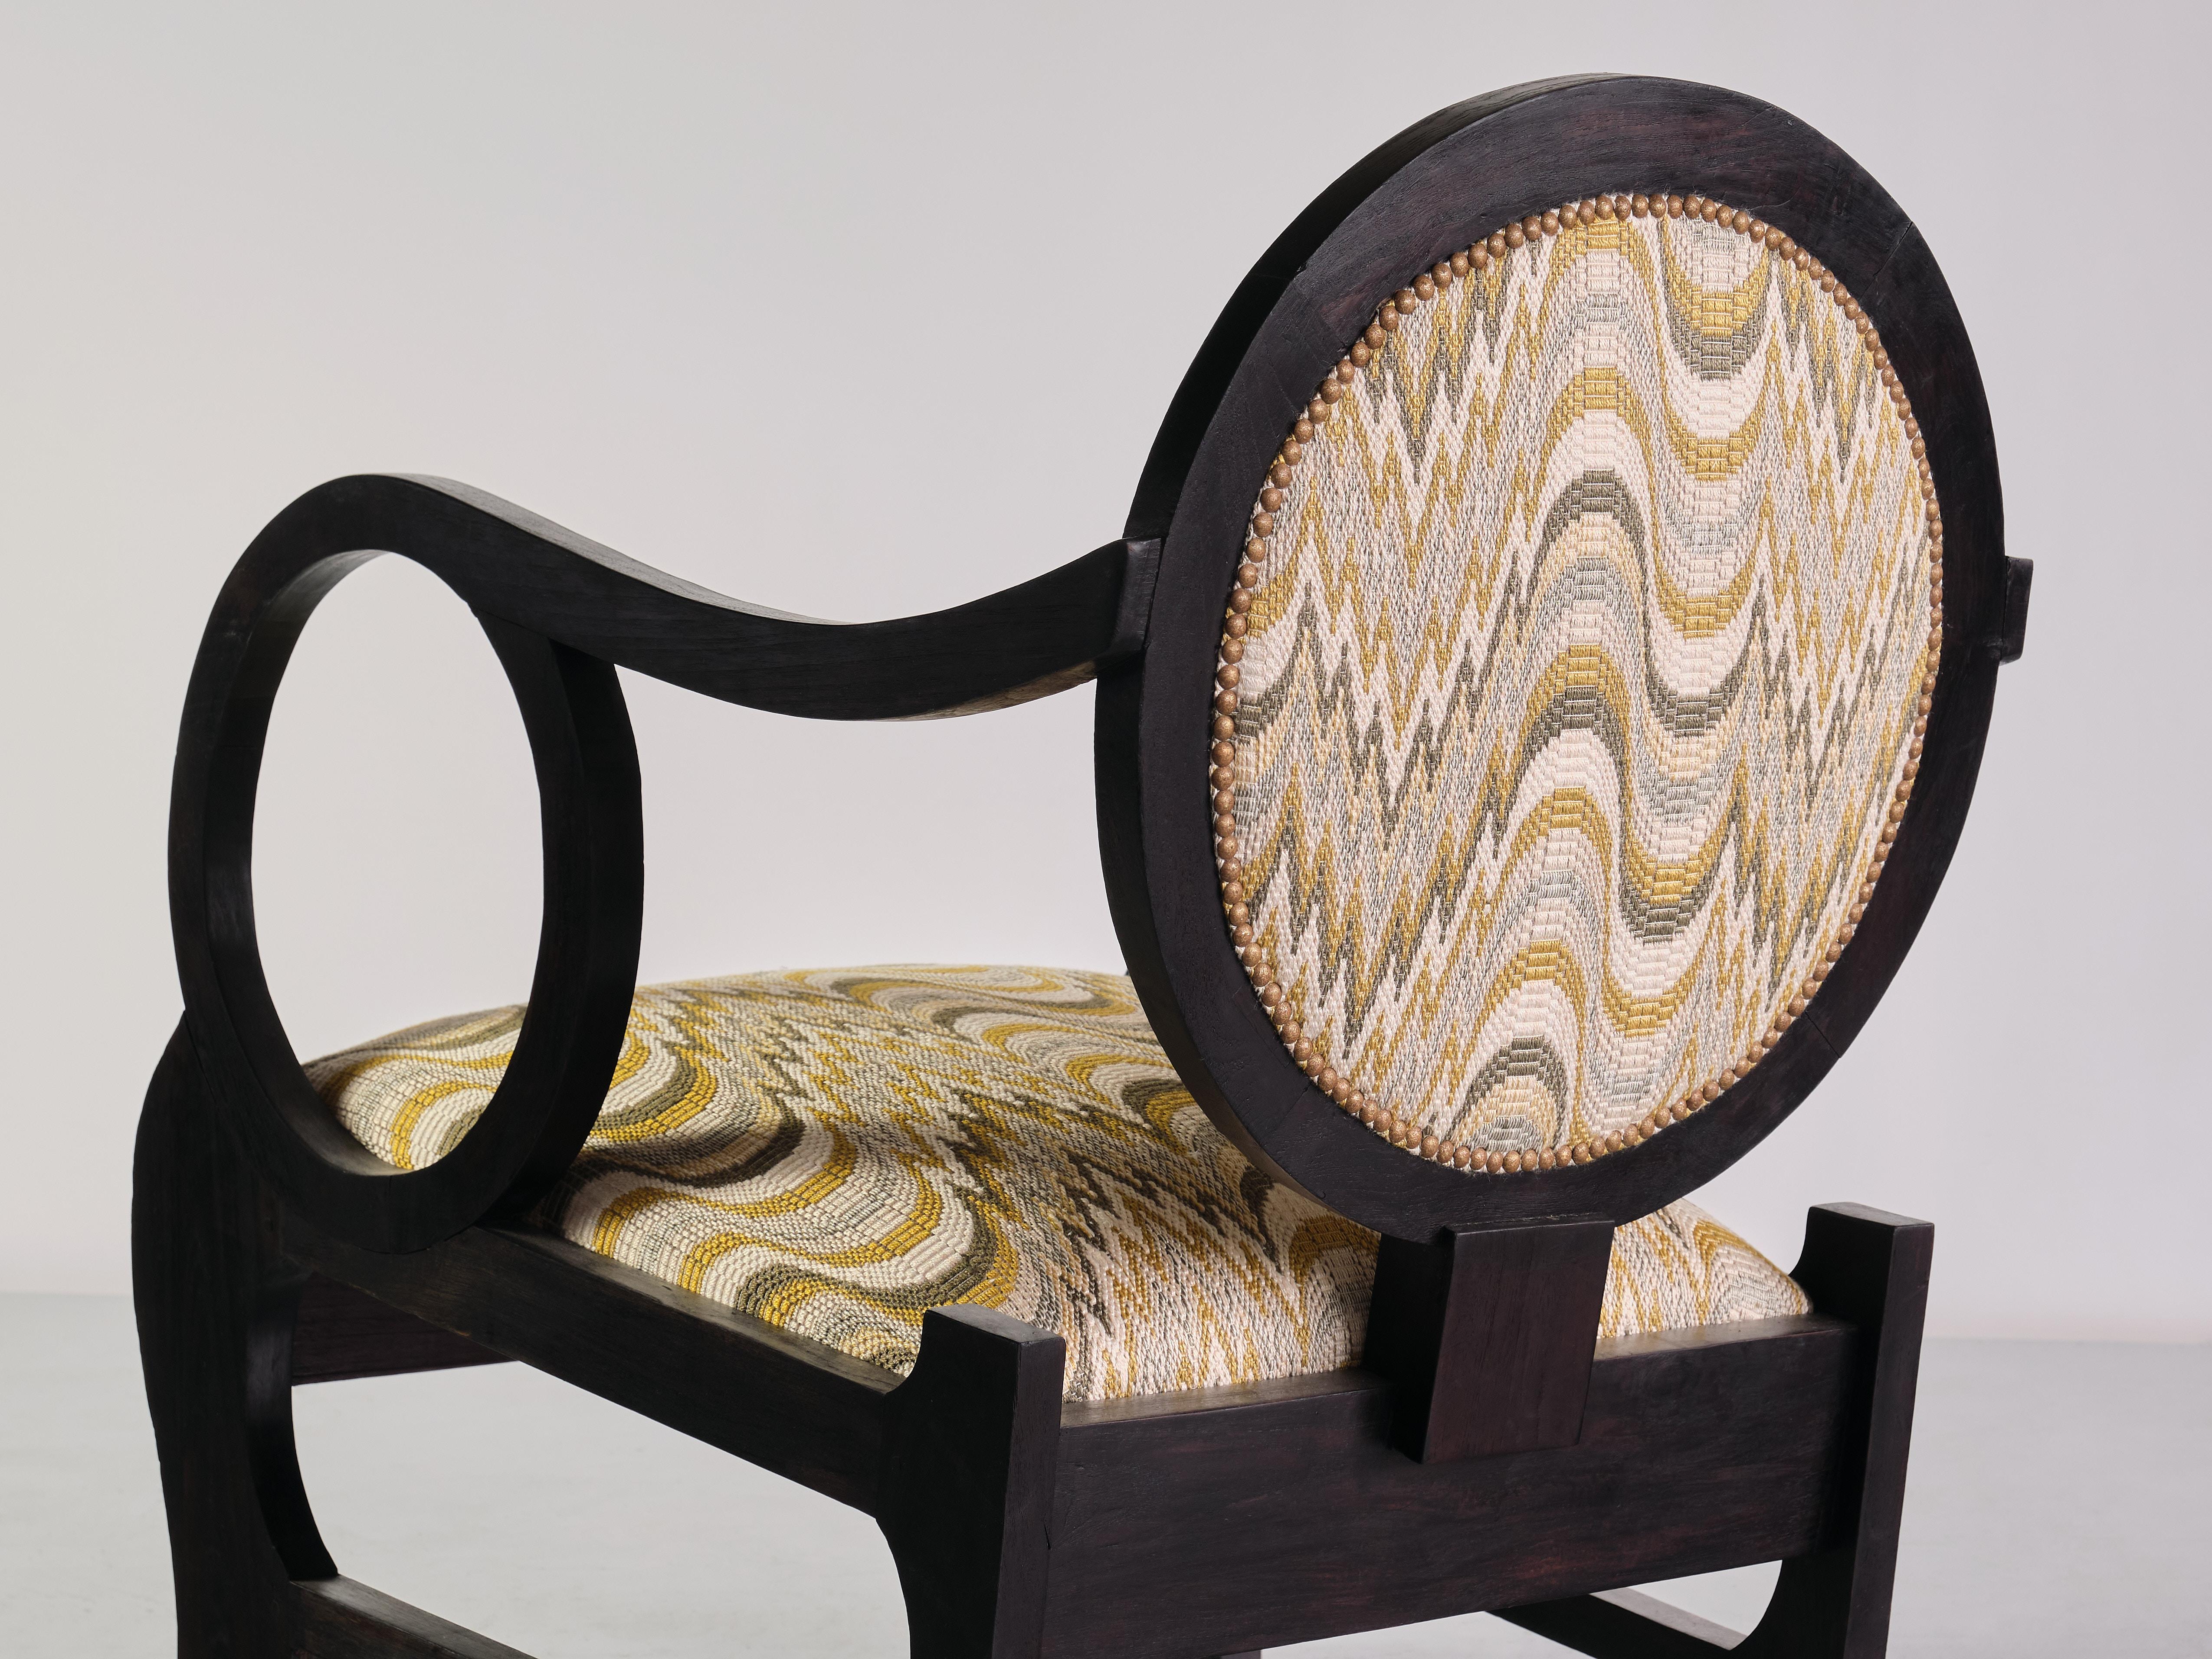 Pair of Lajos Kozma Attributed Armchairs in Oak and Dedar Jacquard, Late 1940s For Sale 8